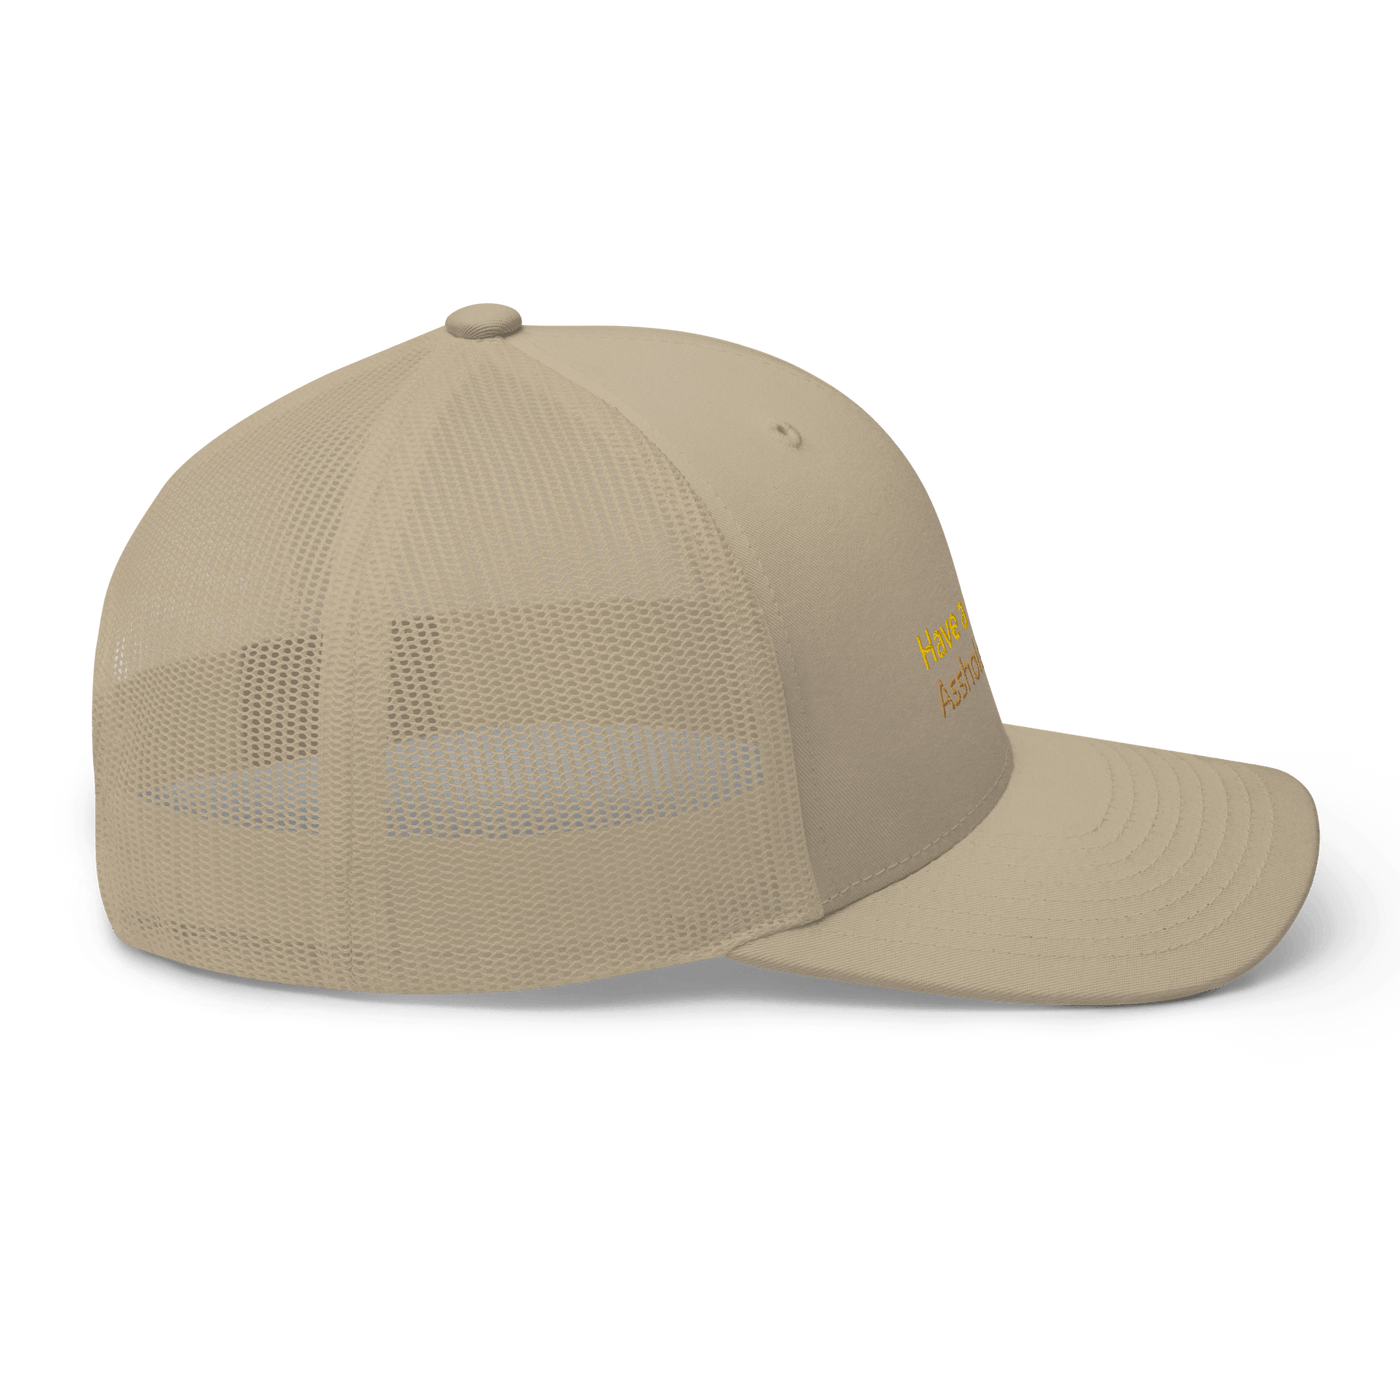 Have a nice day! (asshole) Trucker Cap - Khaki - - Just Another Cap Store